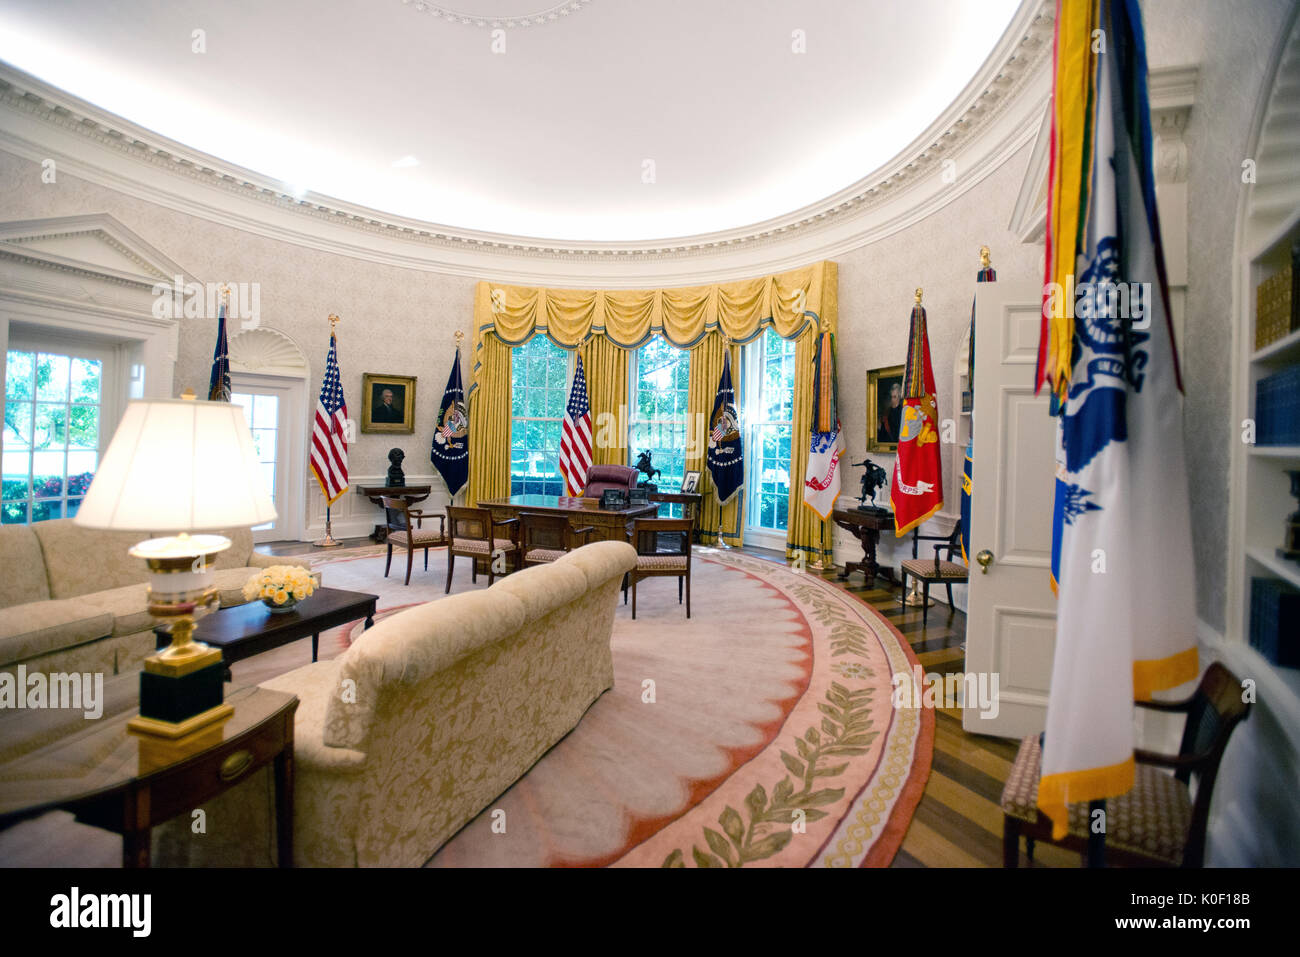 Oval Office White House Desk Stock Photos Oval Office White